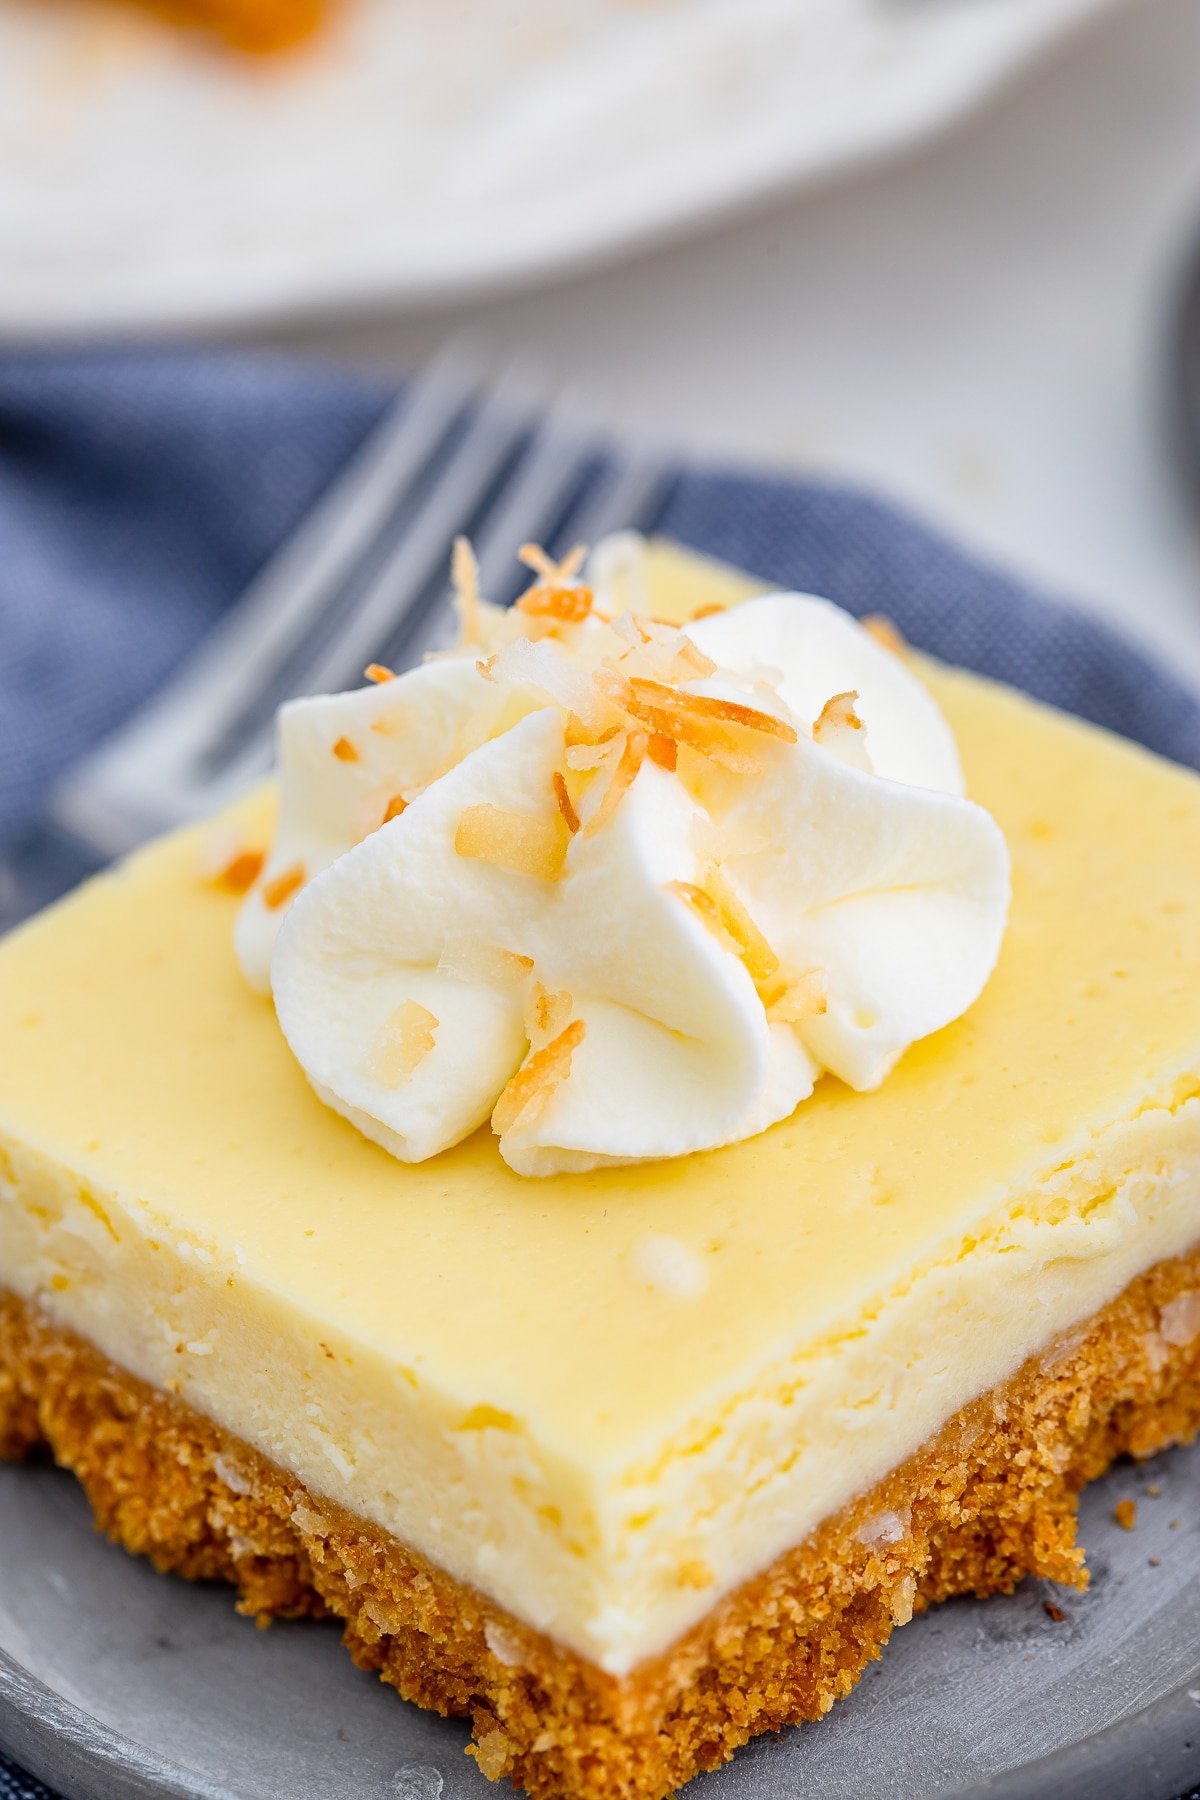 Upclose image of coconut cheesecake